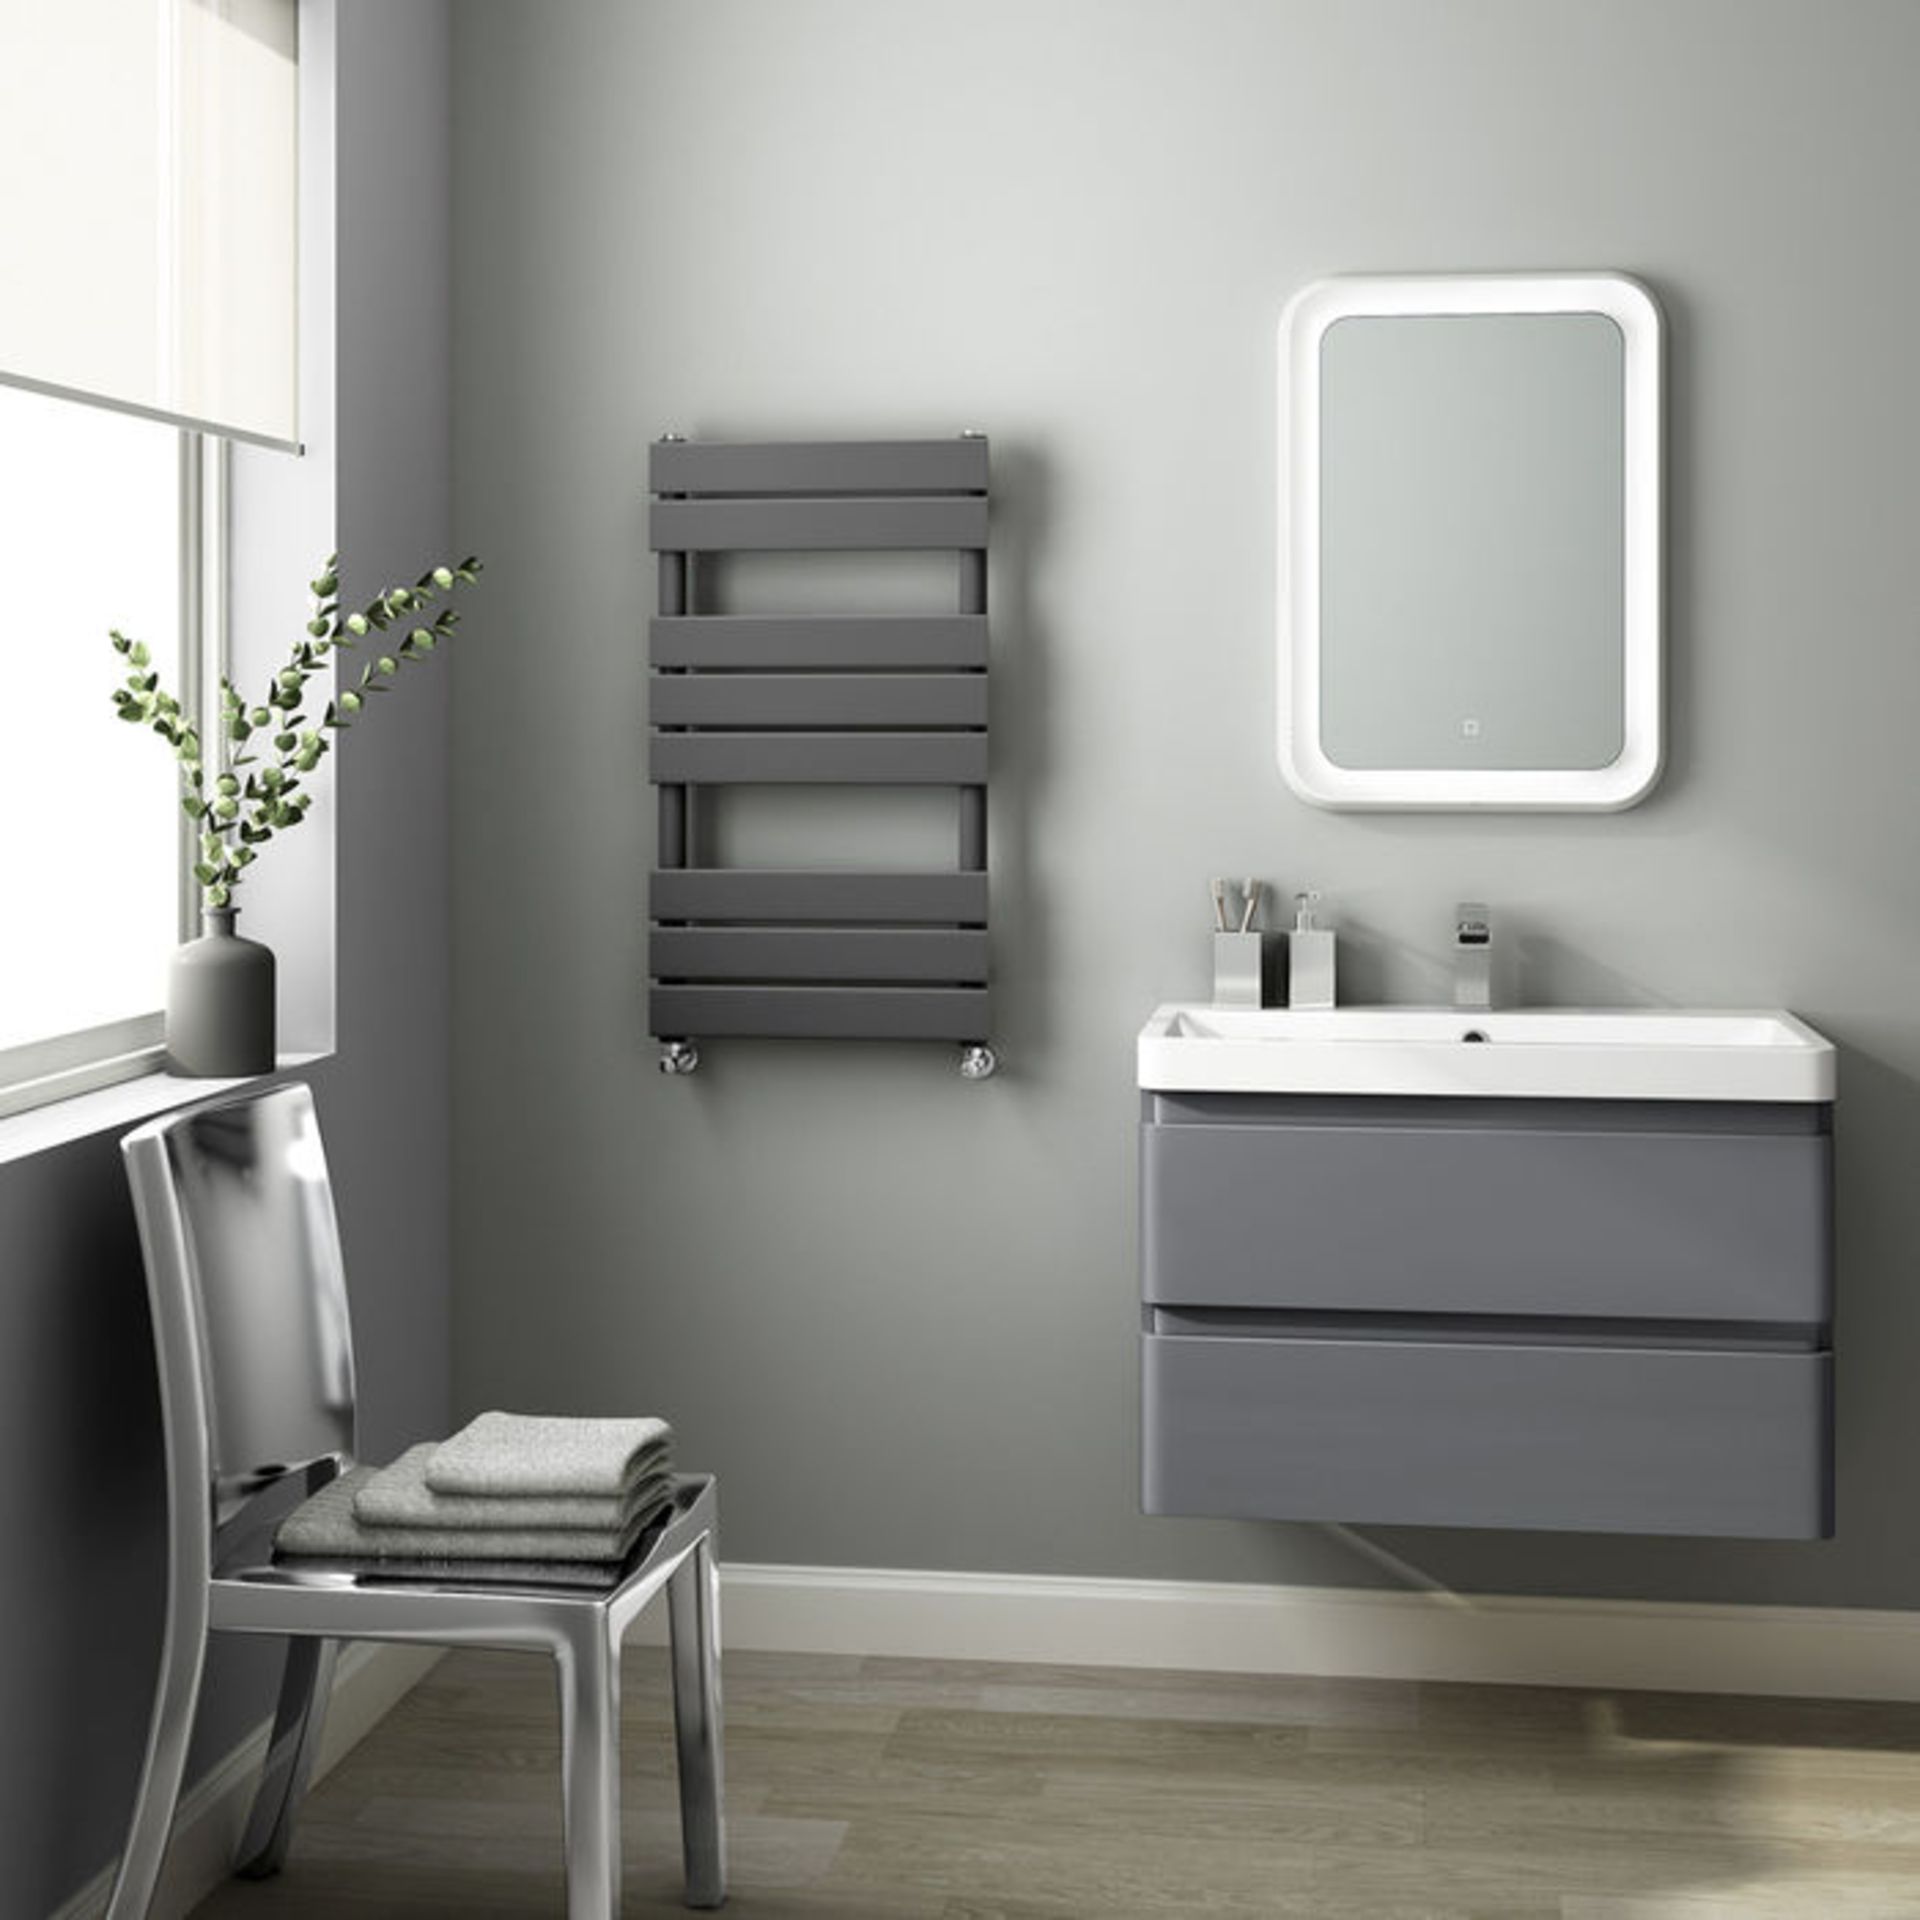 (XS320) 800x450mm Anthracite Flat Panel Ladder Towel Radiator. Made with low carbon steel, - Image 2 of 3